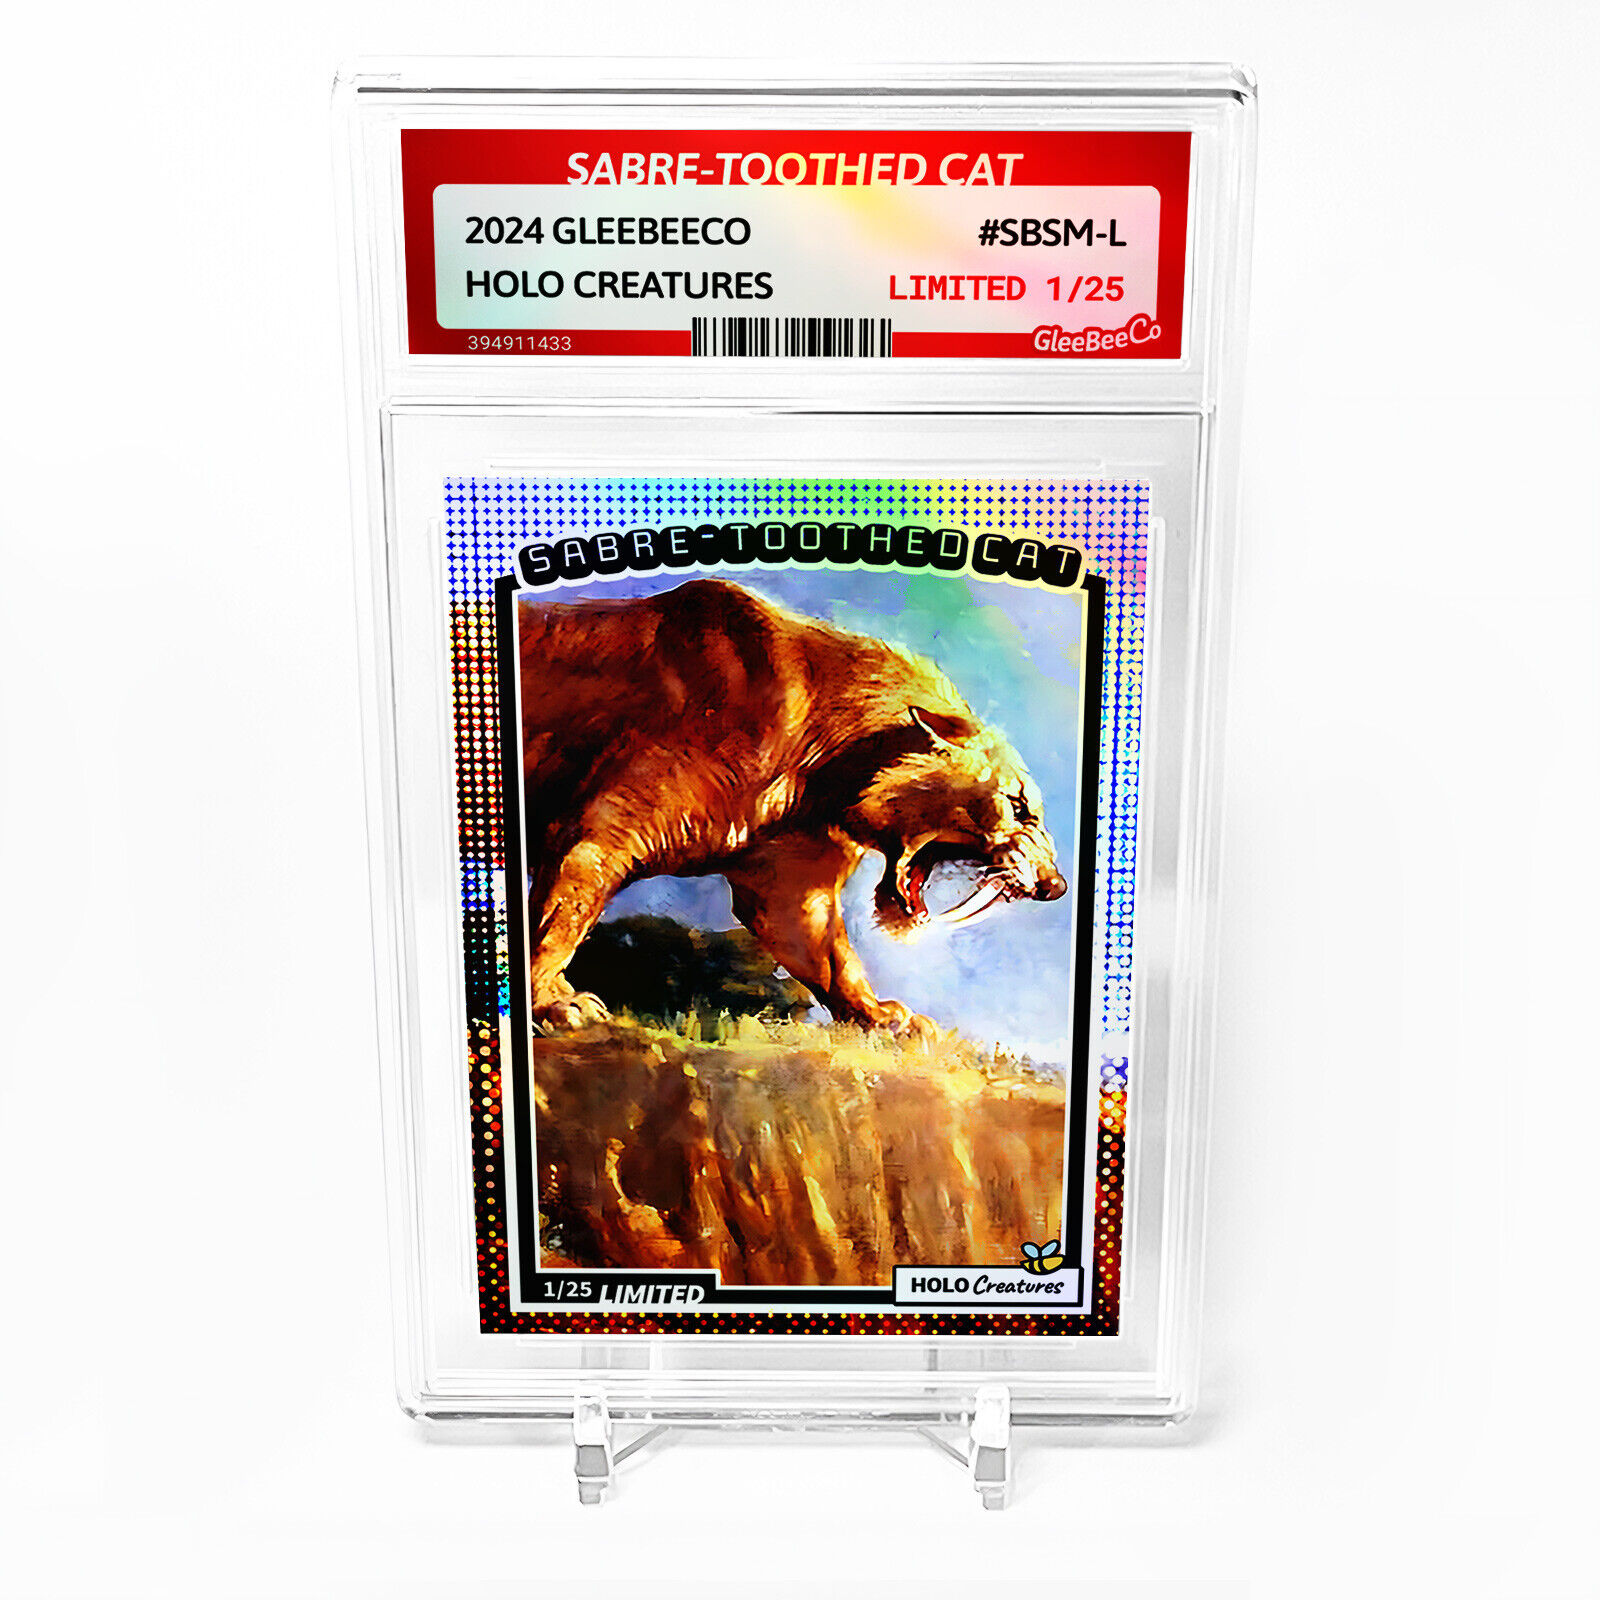 SABRE-TOOTHED CAT Card 2024 GleeBeeCo Smilodon Holographic #SBSM-L /25